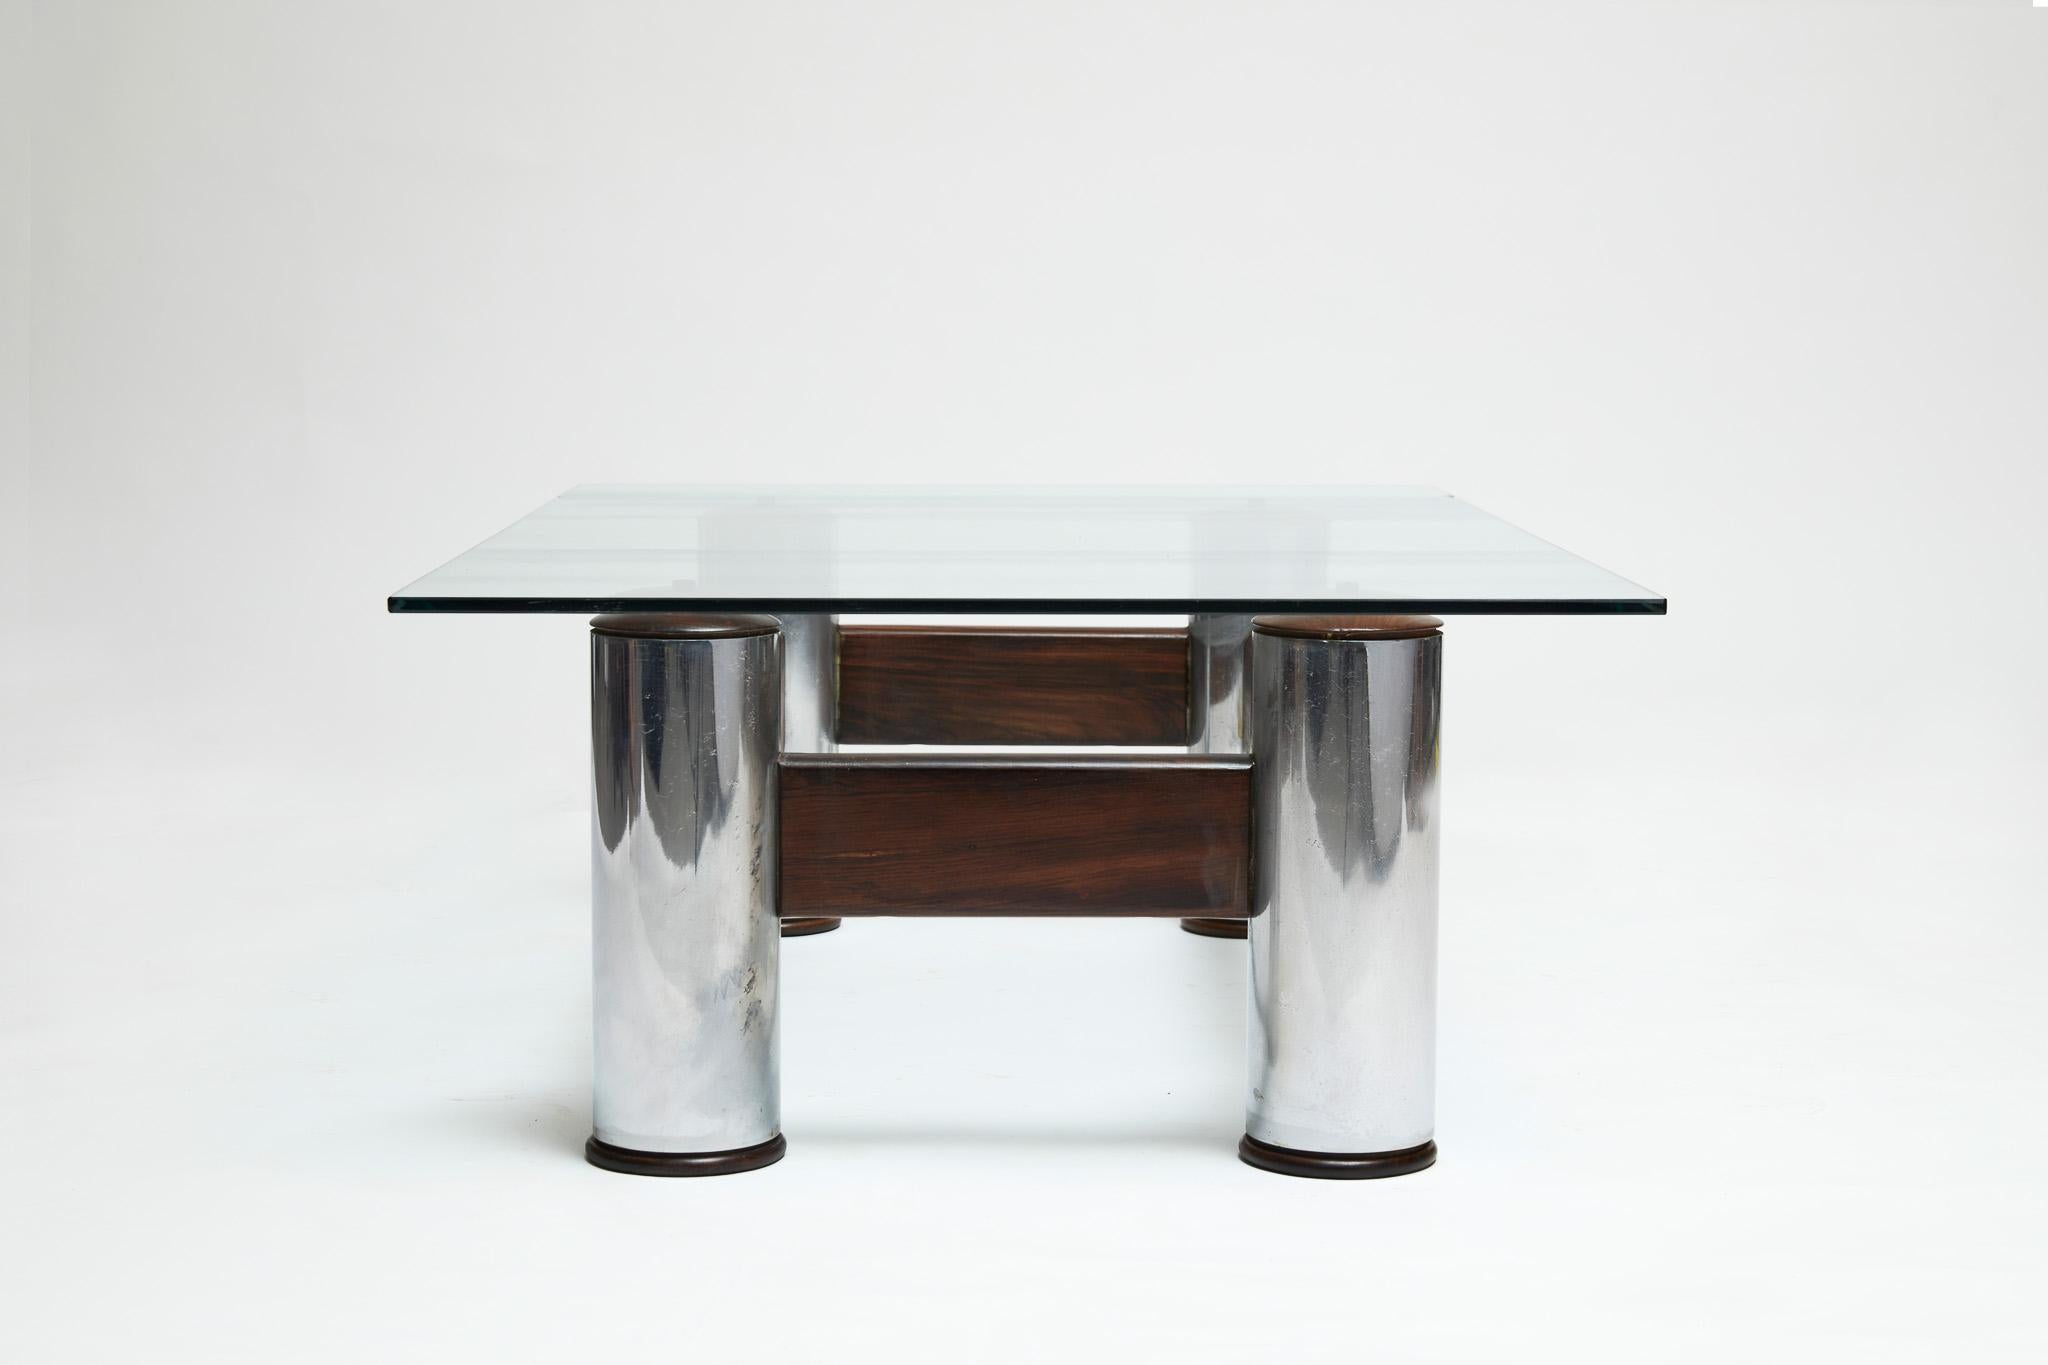 Brazilian Midcentury ModeCoffee Table in Hardwood & Chrome by Sergio Rodrigues 1965 Brazil For Sale